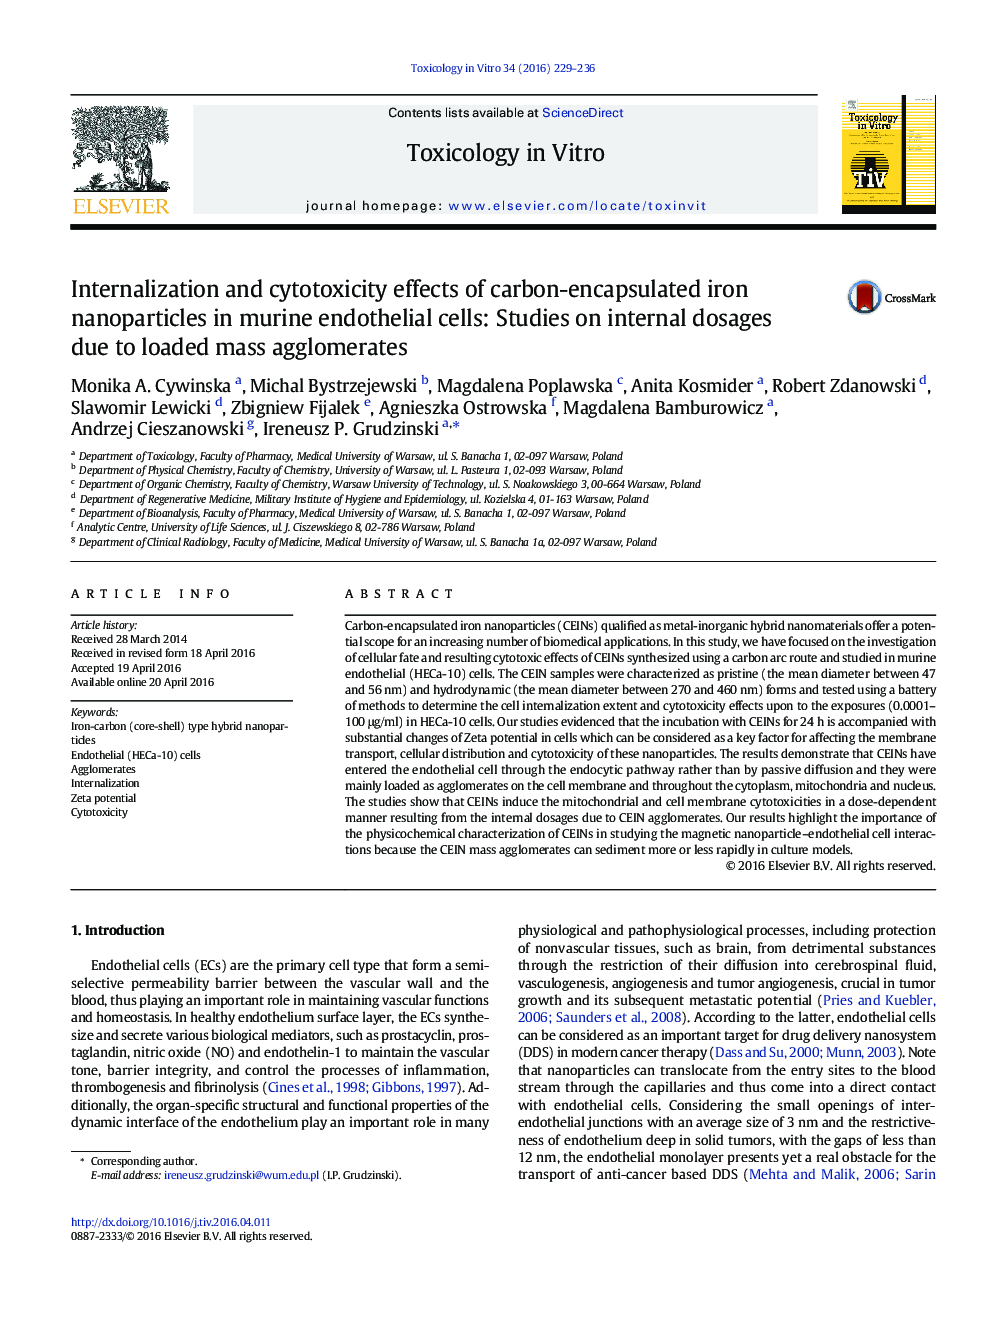 Internalization and cytotoxicity effects of carbon-encapsulated iron nanoparticles in murine endothelial cells: Studies on internal dosages due to loaded mass agglomerates